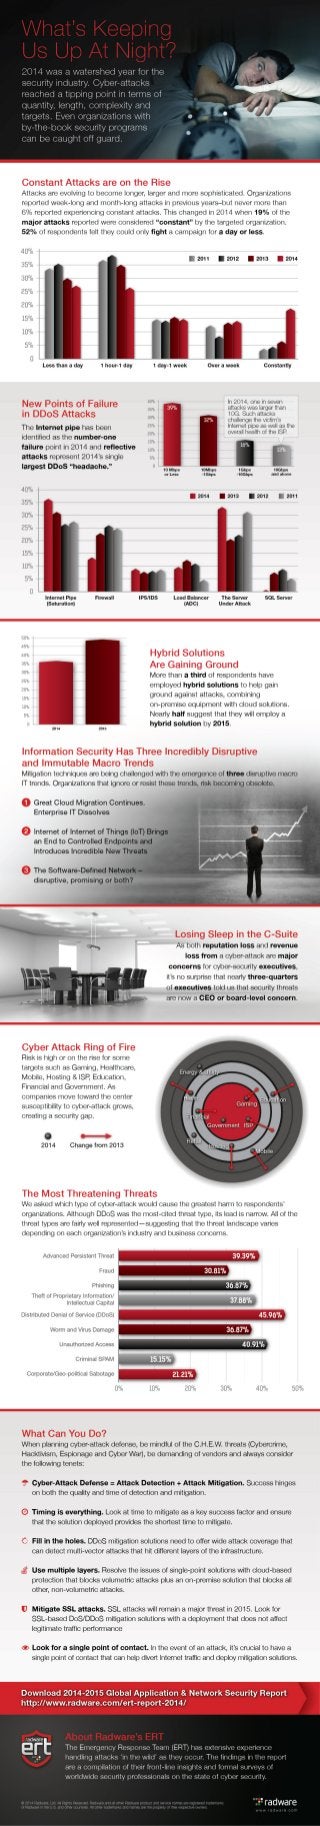 Radware Global Application & Network Security Report 2014-2015 Infographic